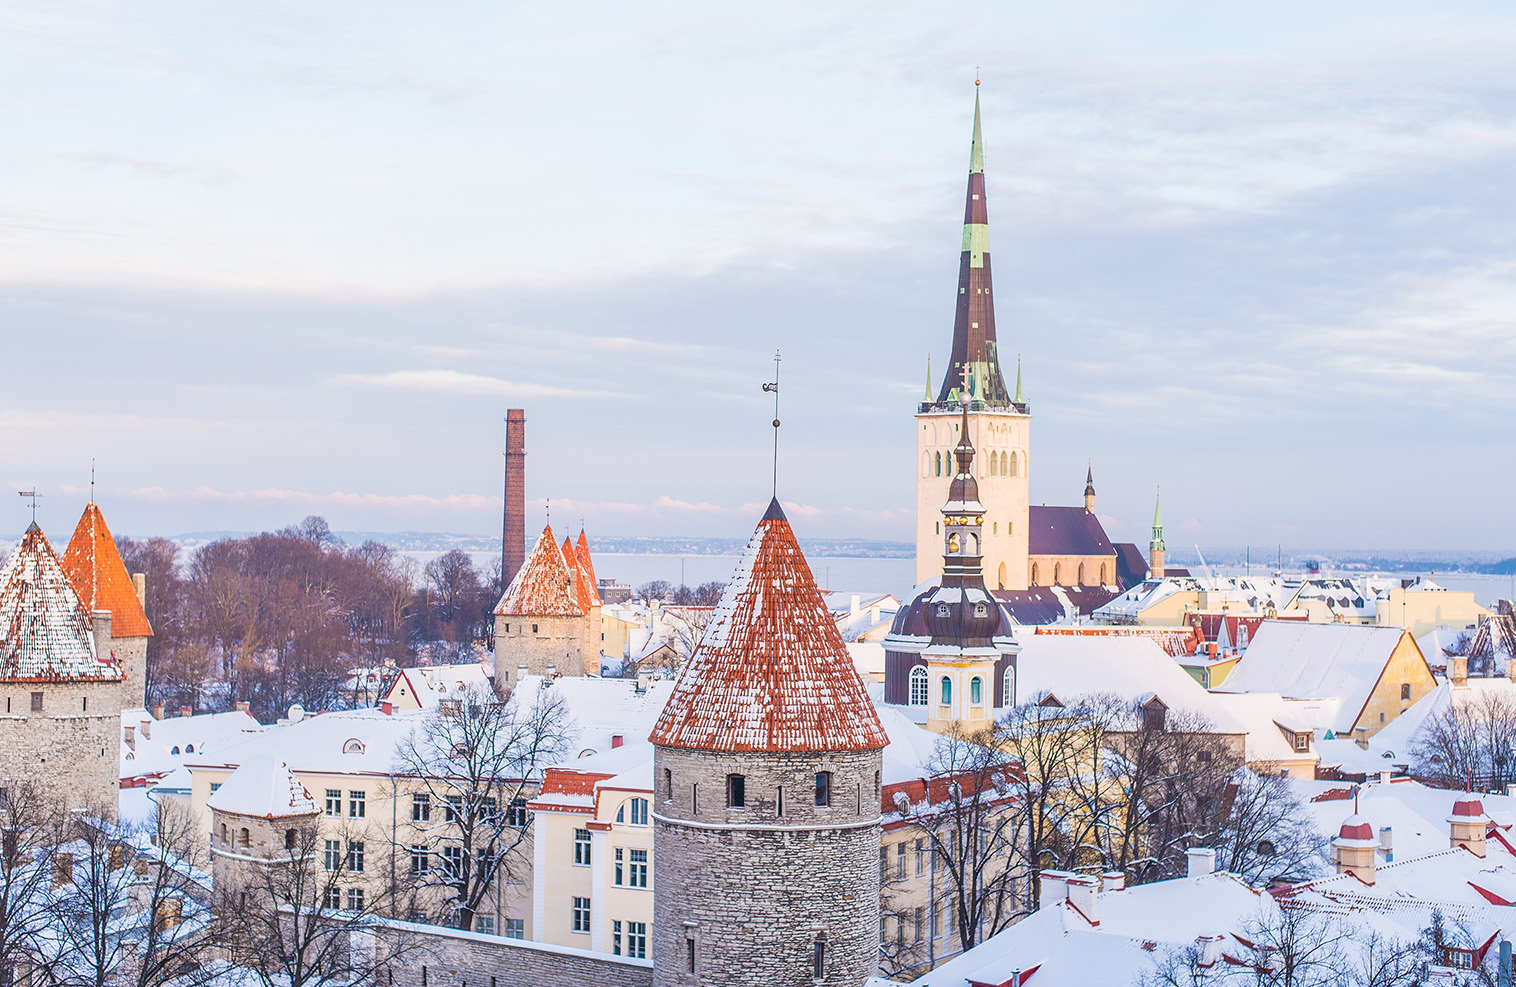 Taxes and payrolls: analyzing the labour market in Estonia